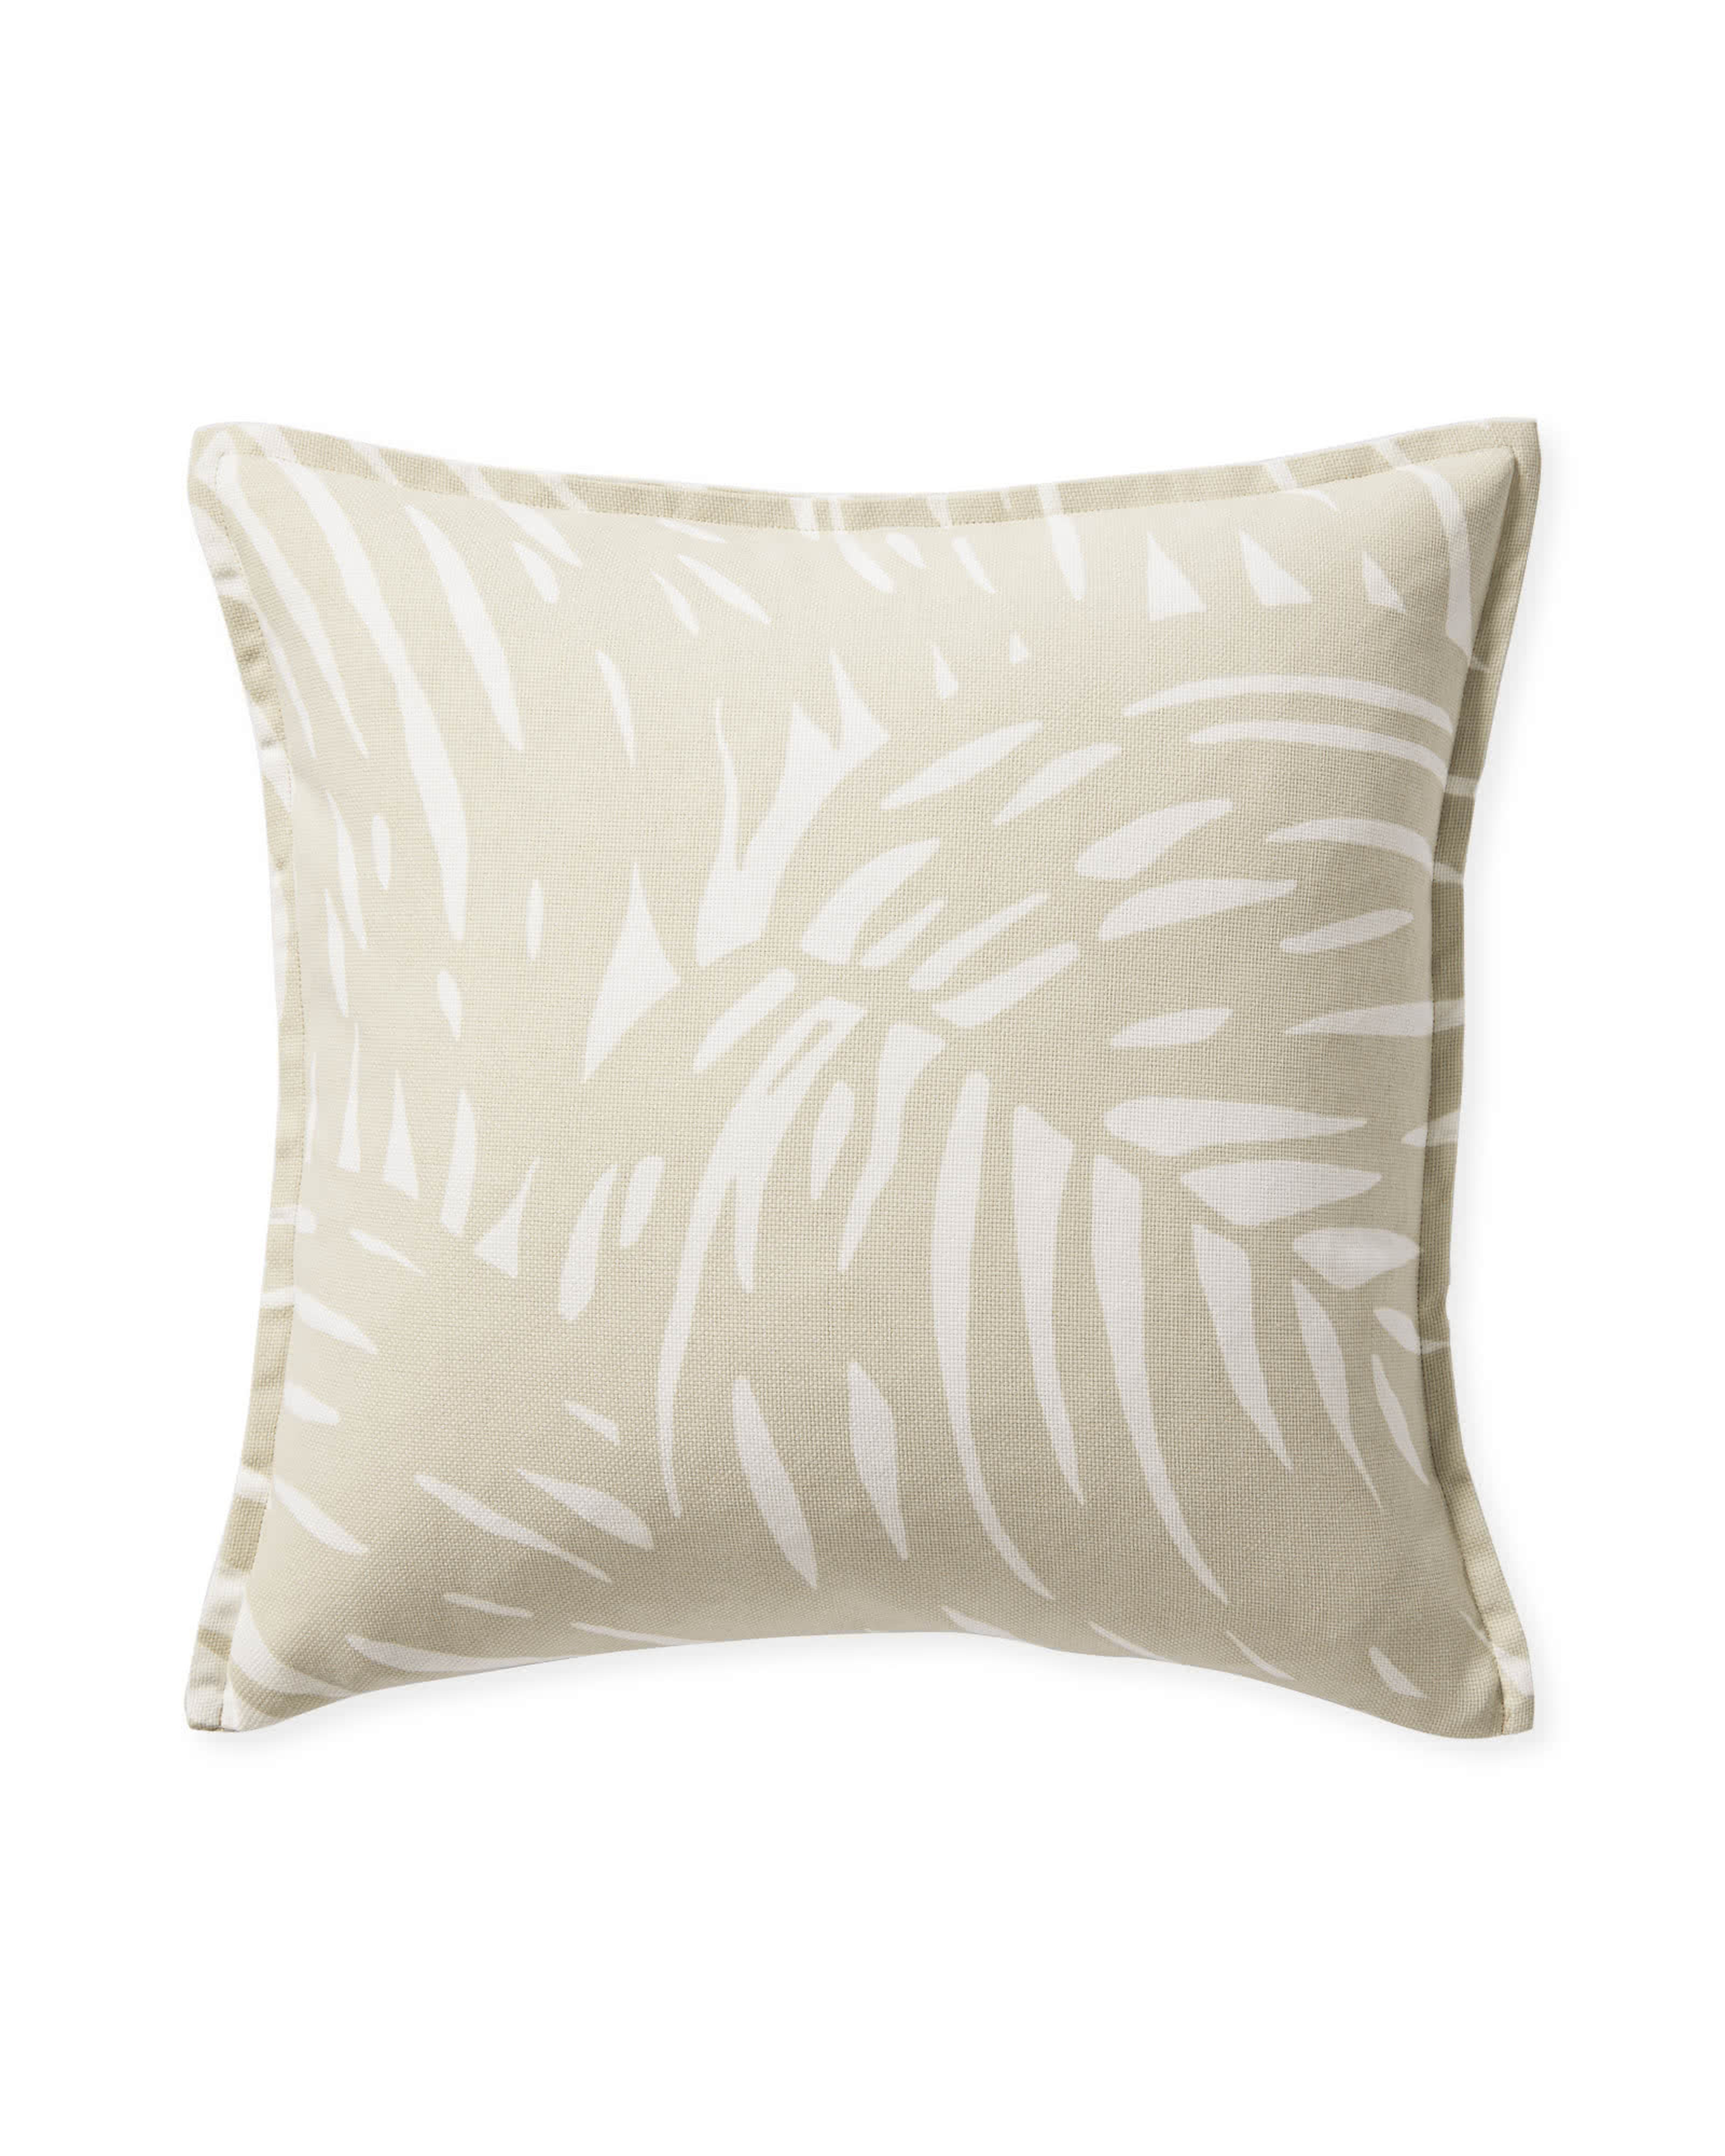 Palm Outdoor Pillow Cover - Natural - Serena and Lily